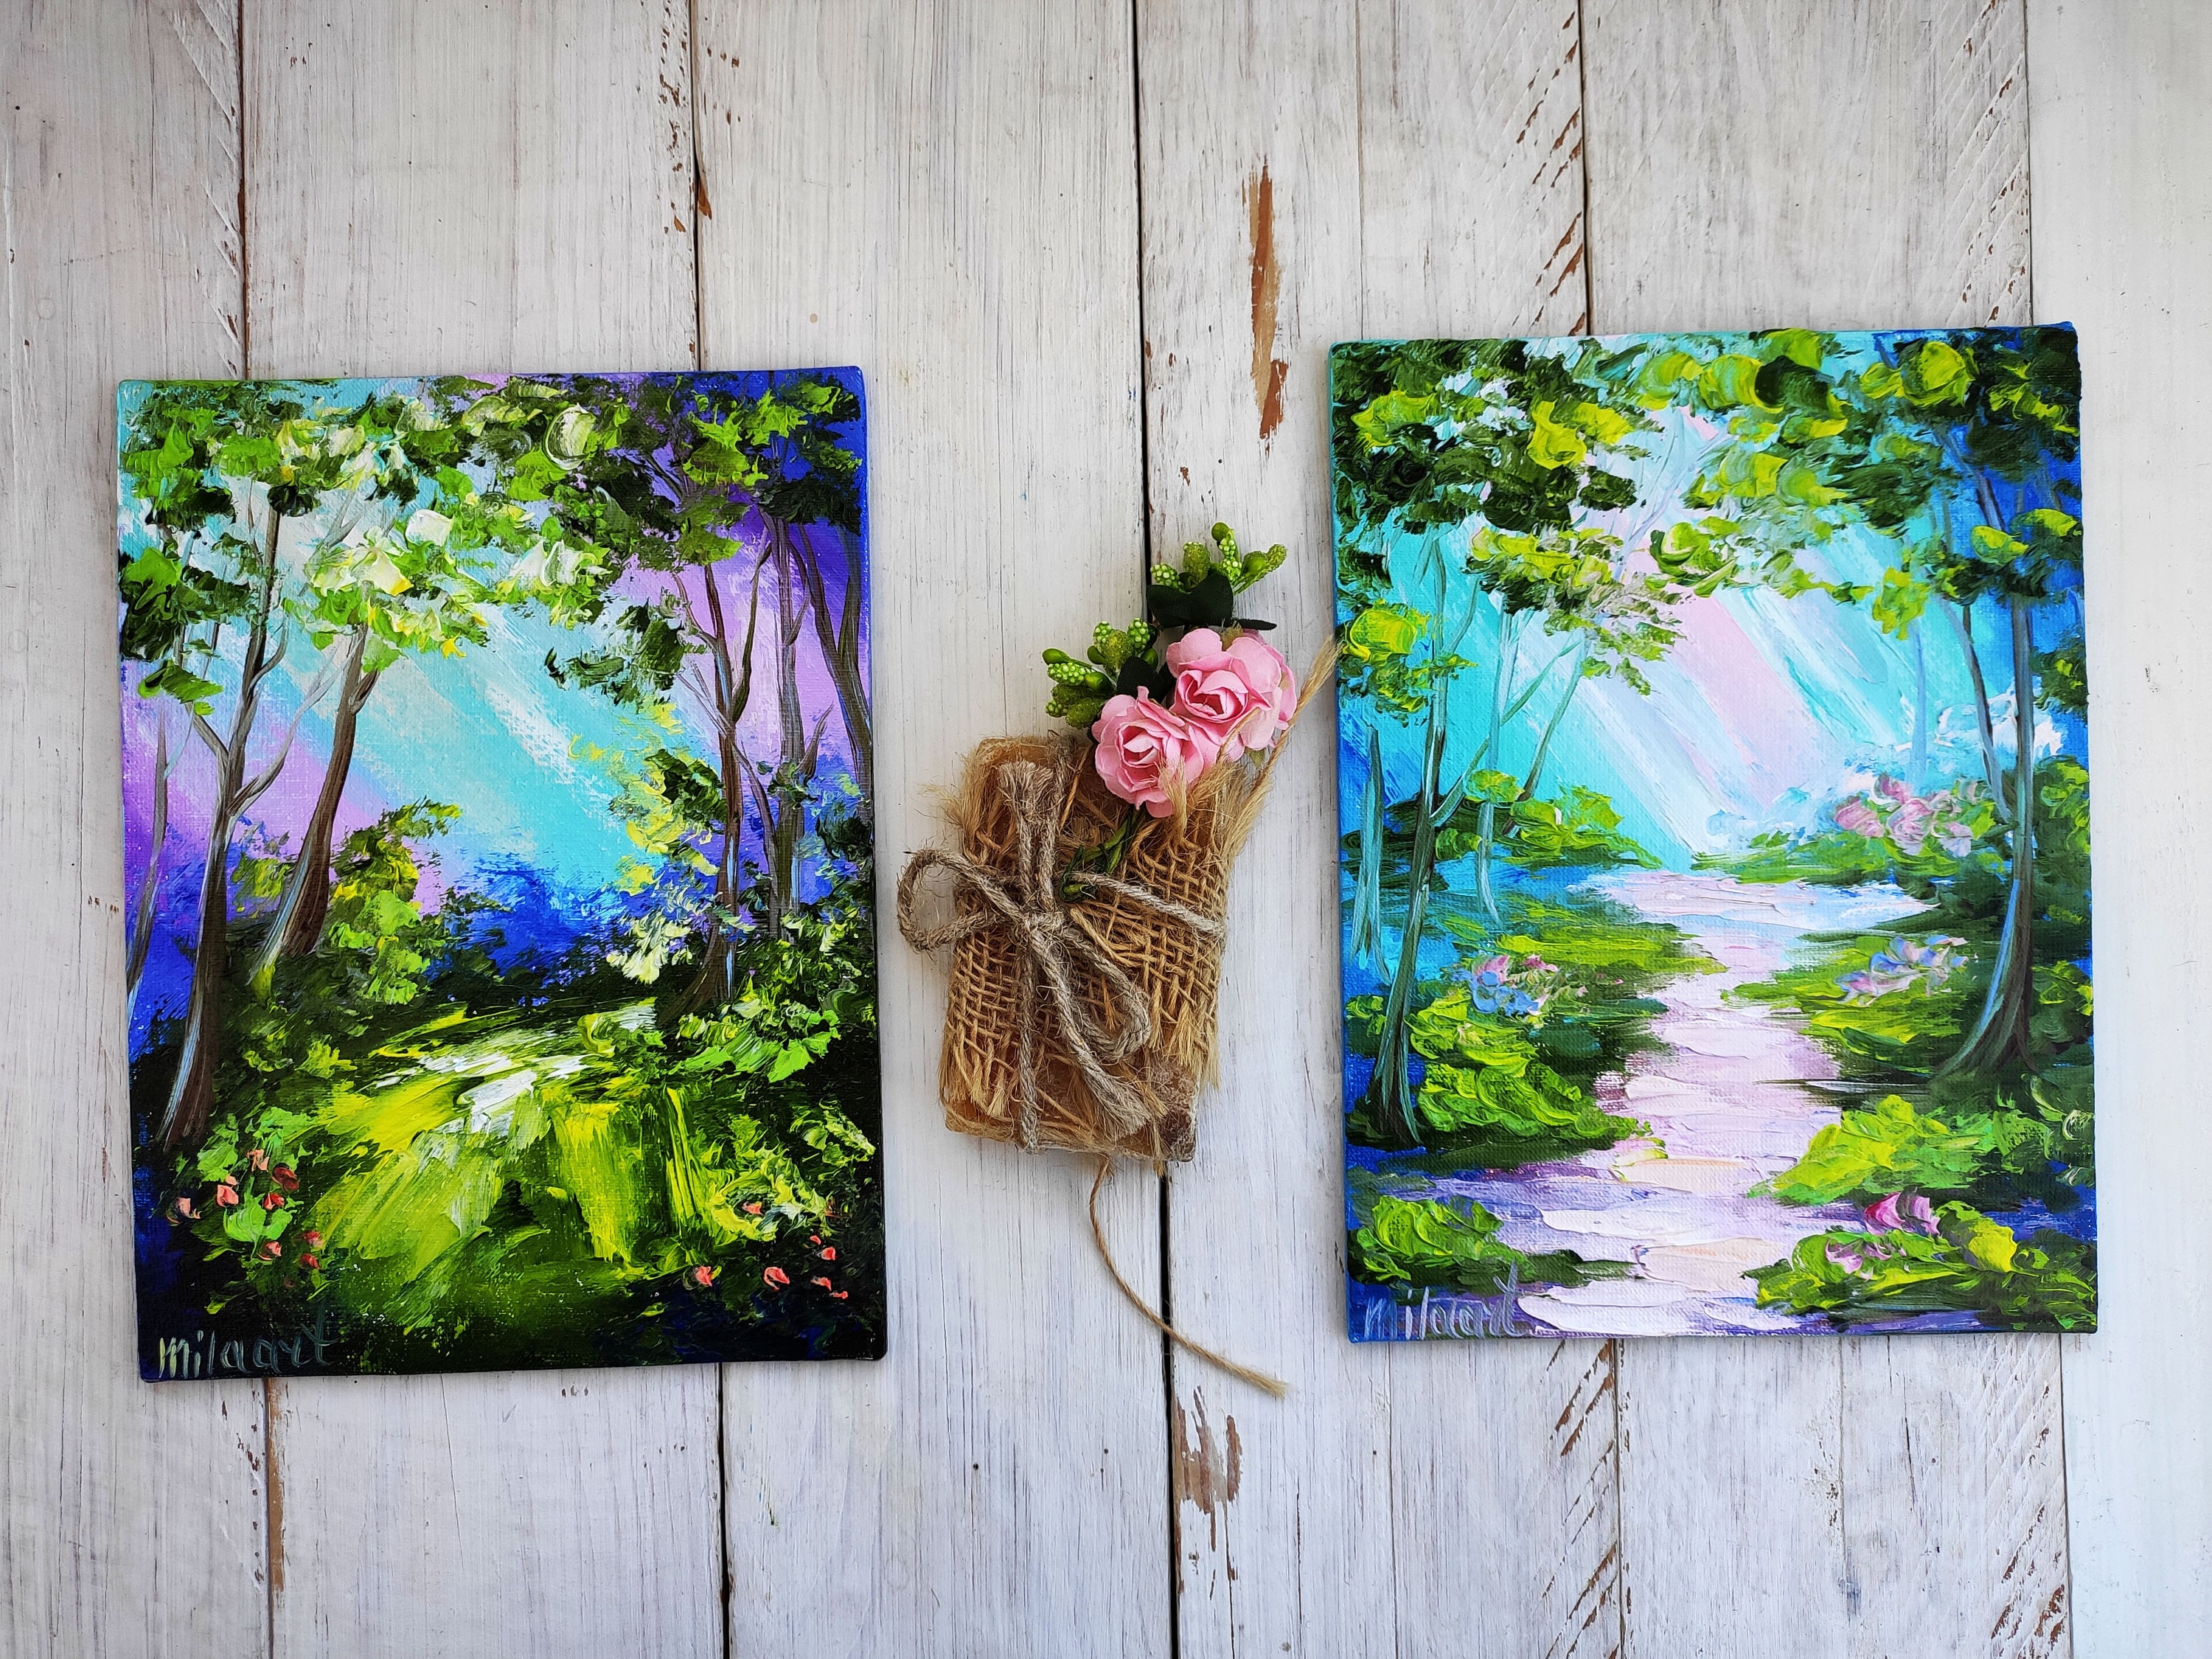 Small painting  Small canvas paintings, Diy canvas art, Mini